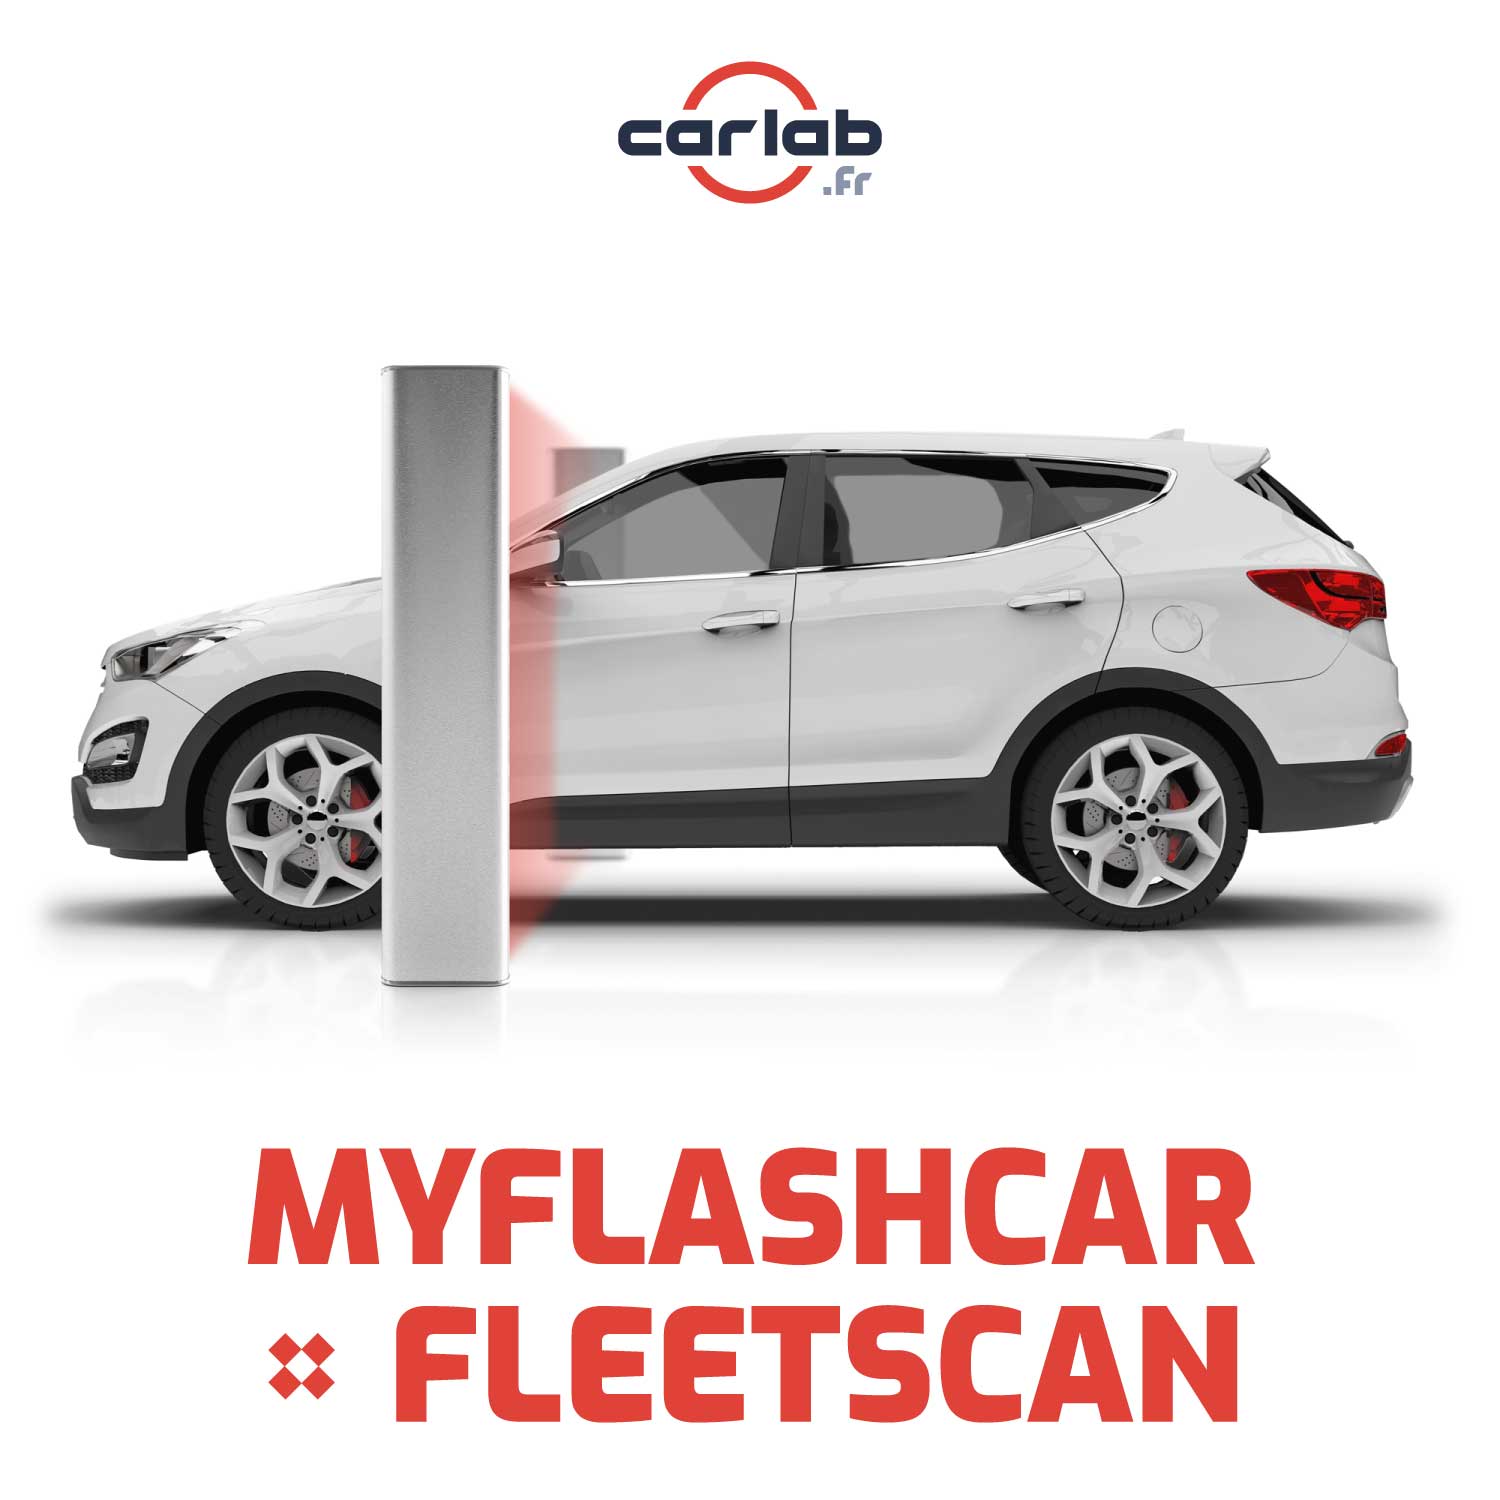 bouton page myflashcar x fleetscan colonne inspection automobile